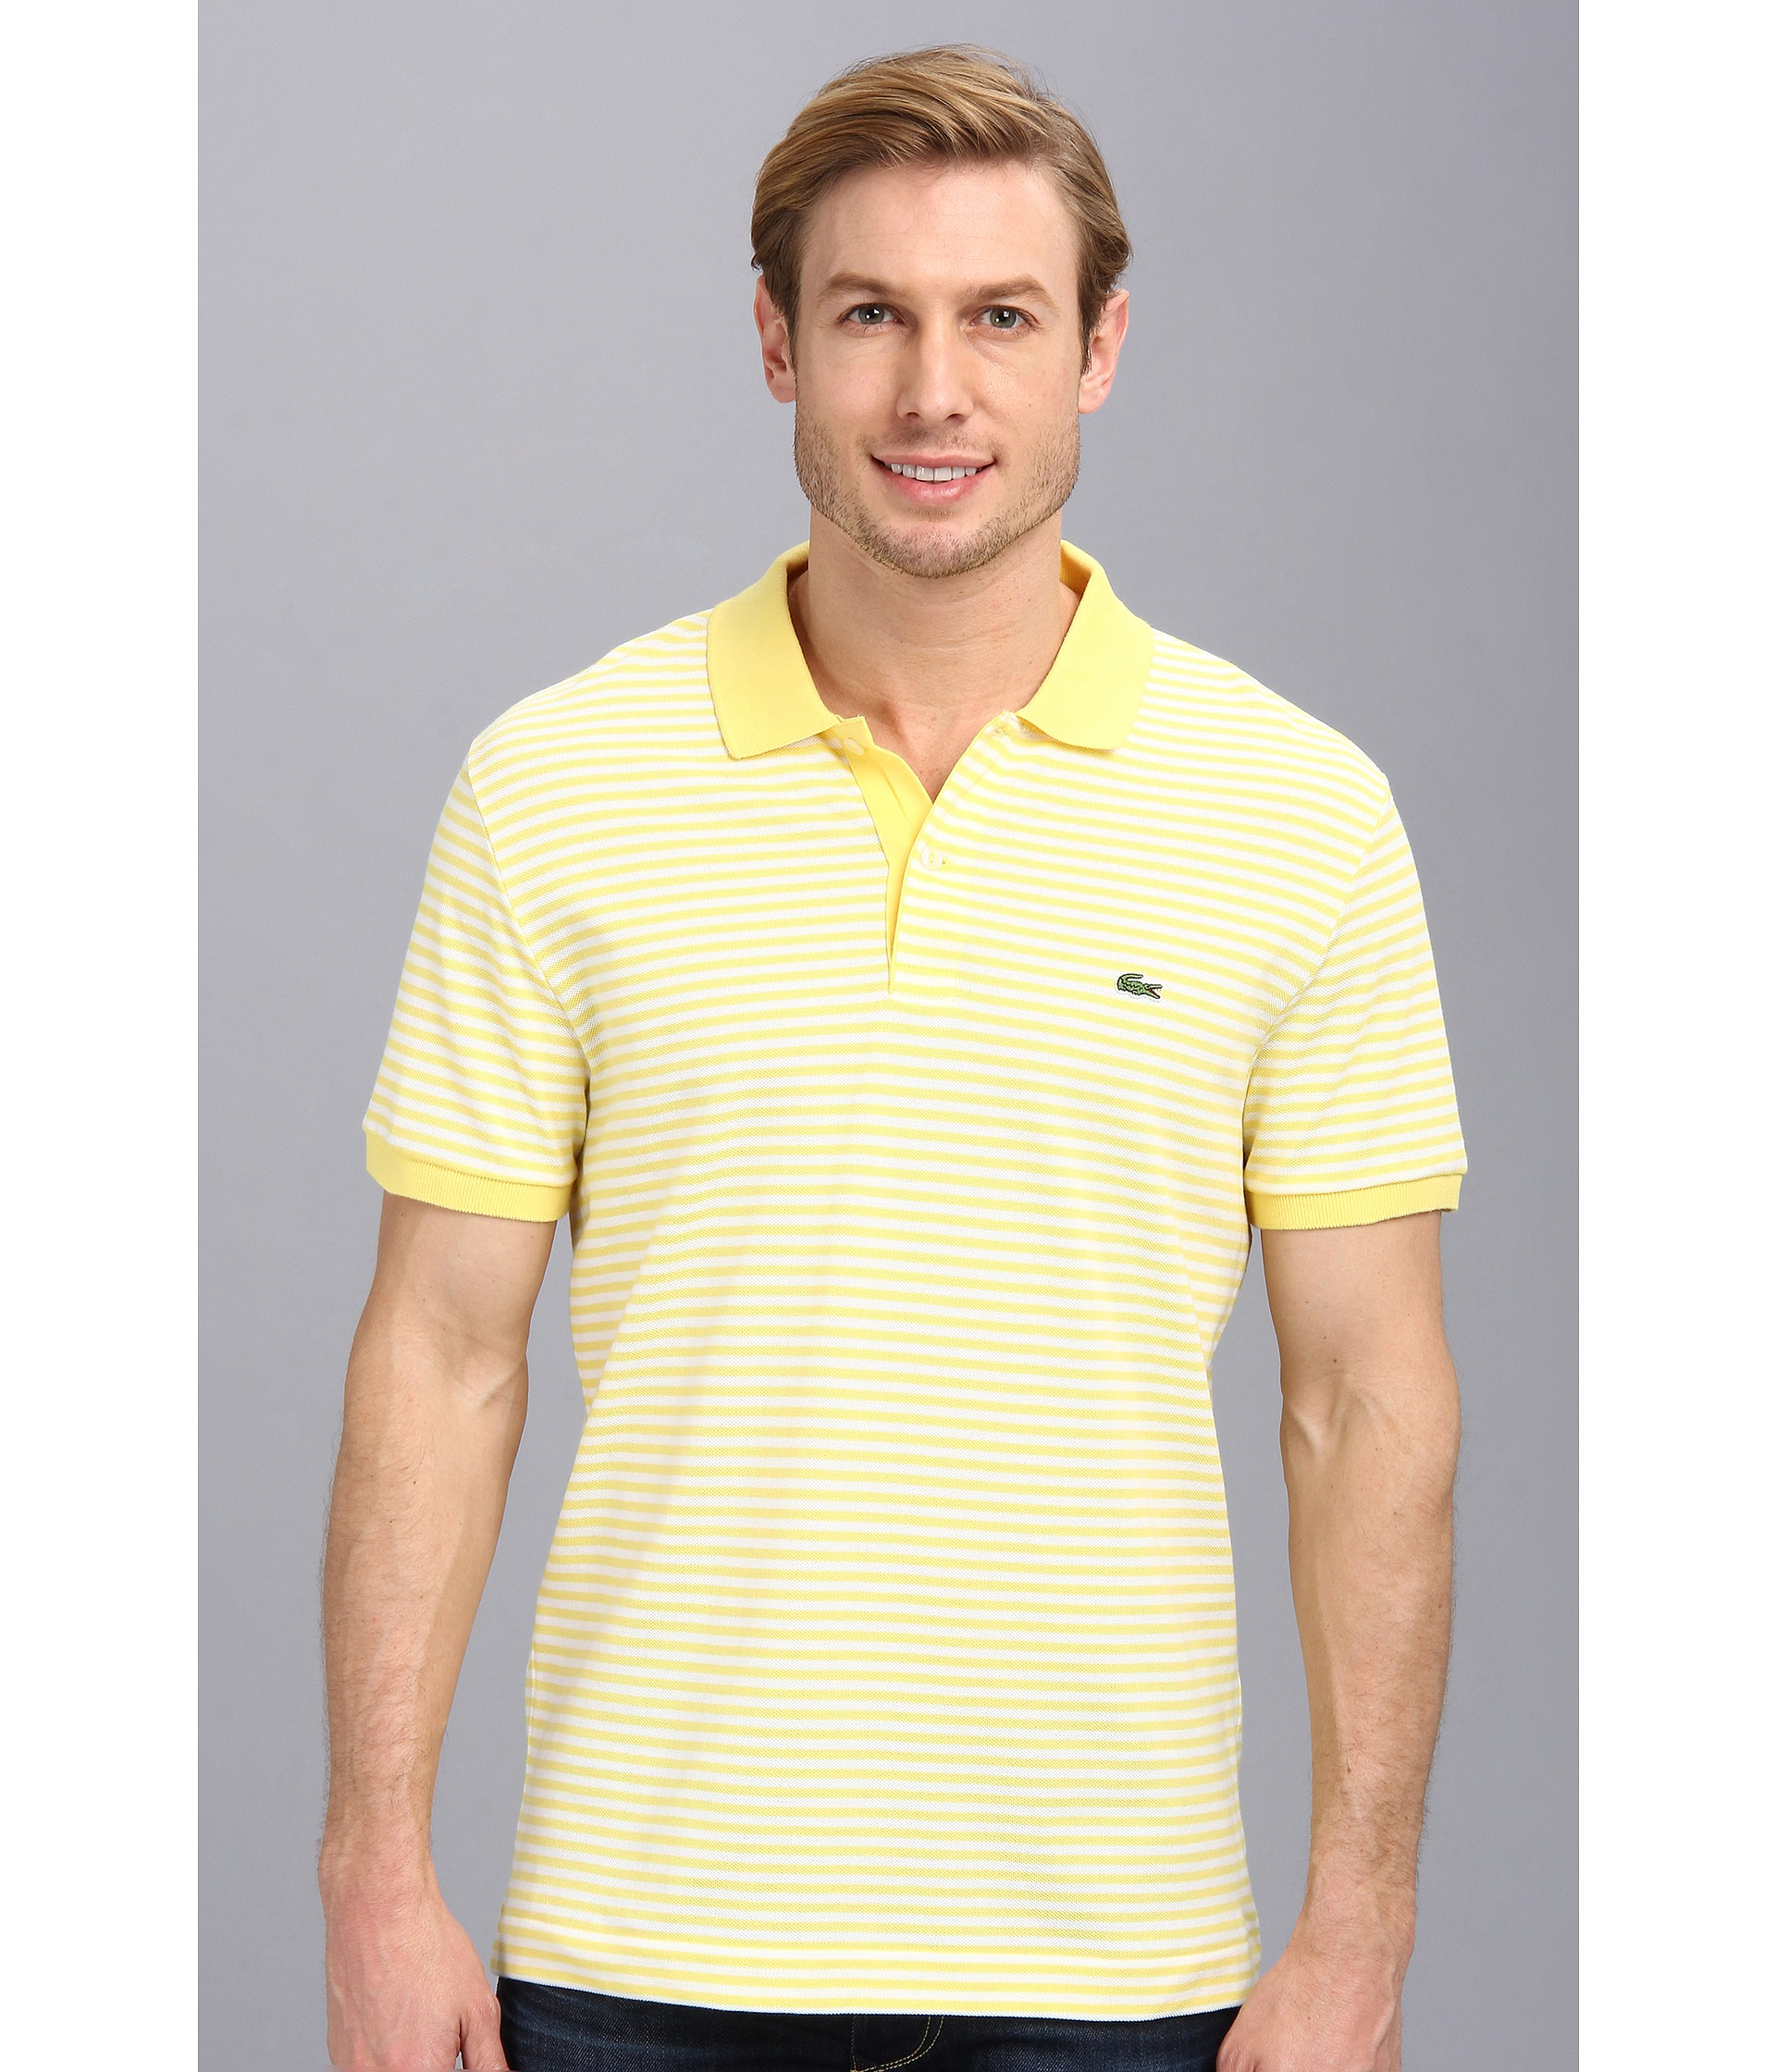 Lyst - Lacoste Short Sleeve Heritage Fine Stripe Pique Polo Shirt in ...